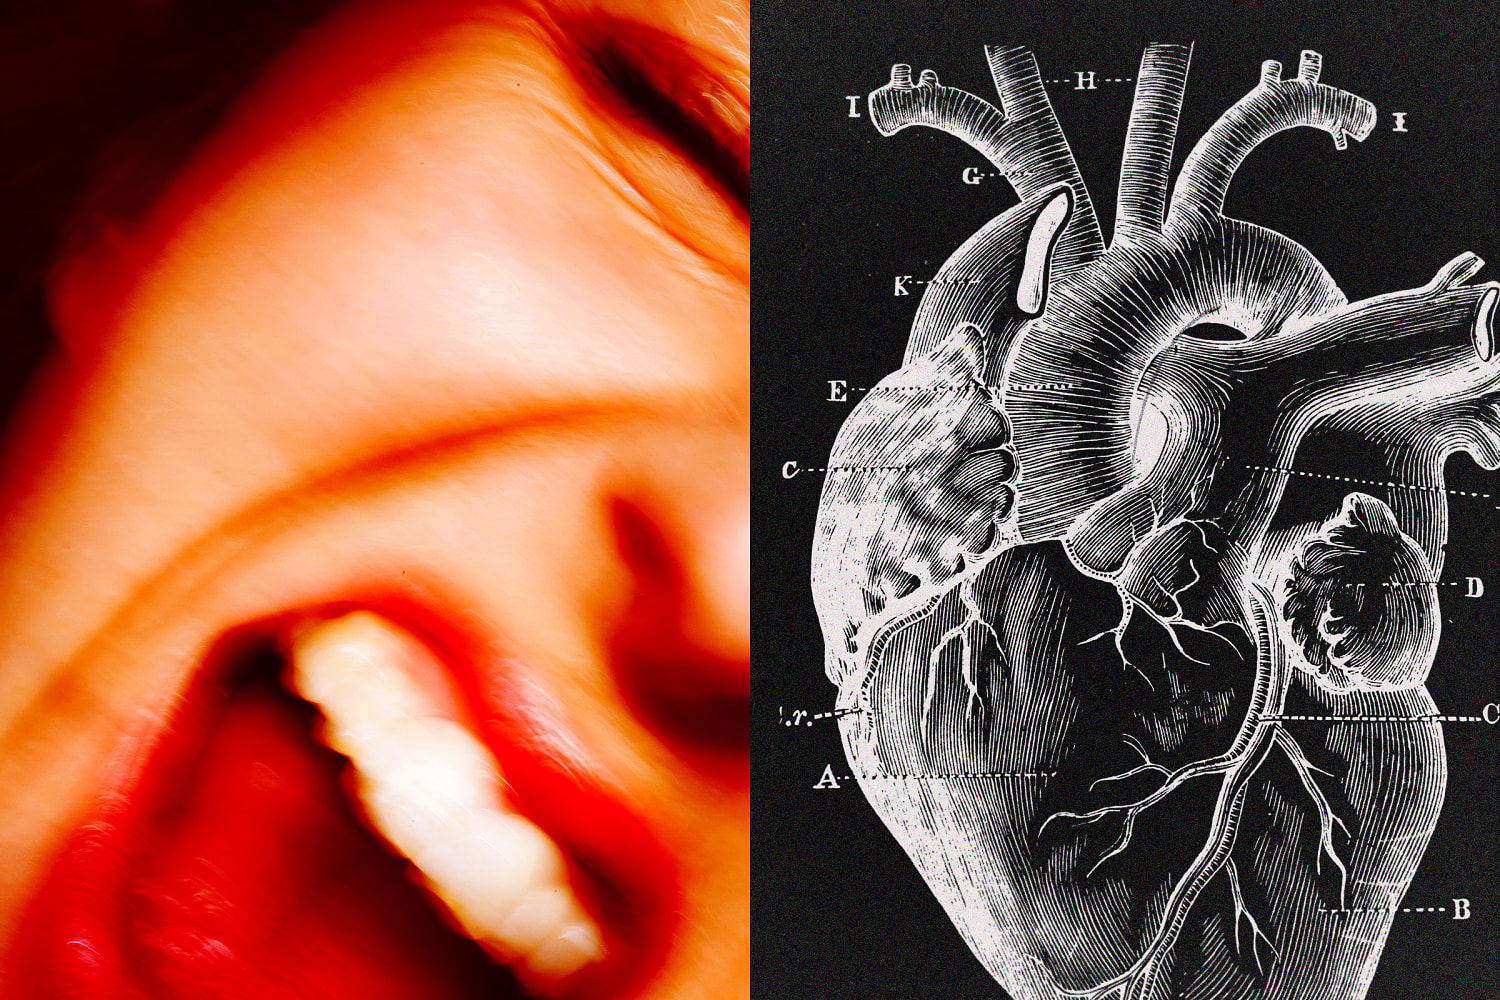 New research shows how a surge of anger could raise heart attack risk